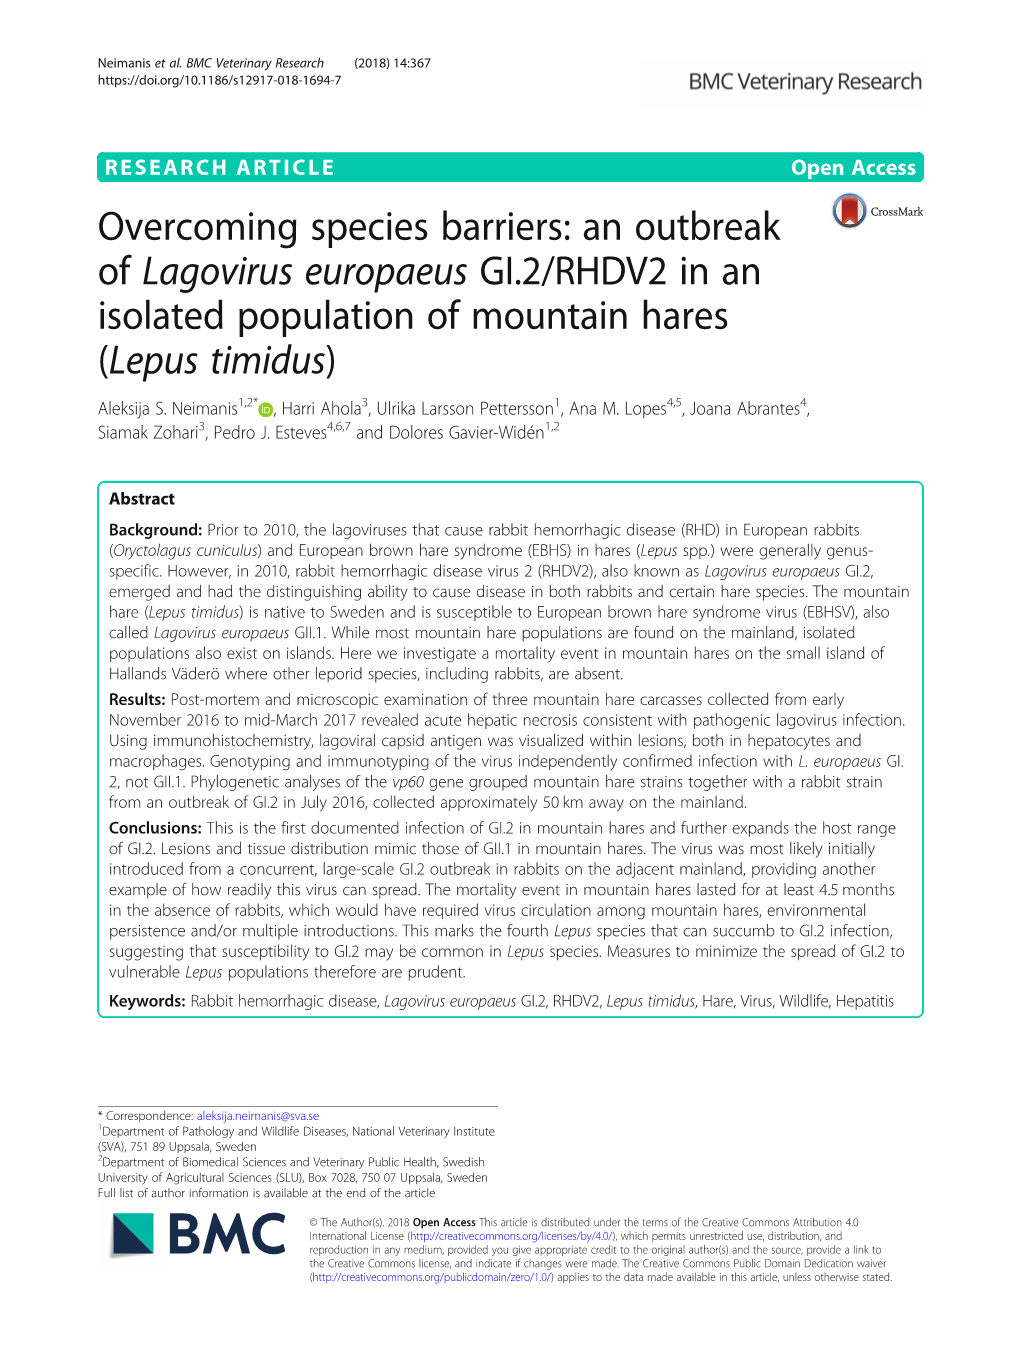 Overcoming Species Barriers: an Outbreak of Lagovirus Europaeus GI.2/RHDV2 in an Isolated Population of Mountain Hares (Lepus Timidus) Aleksija S